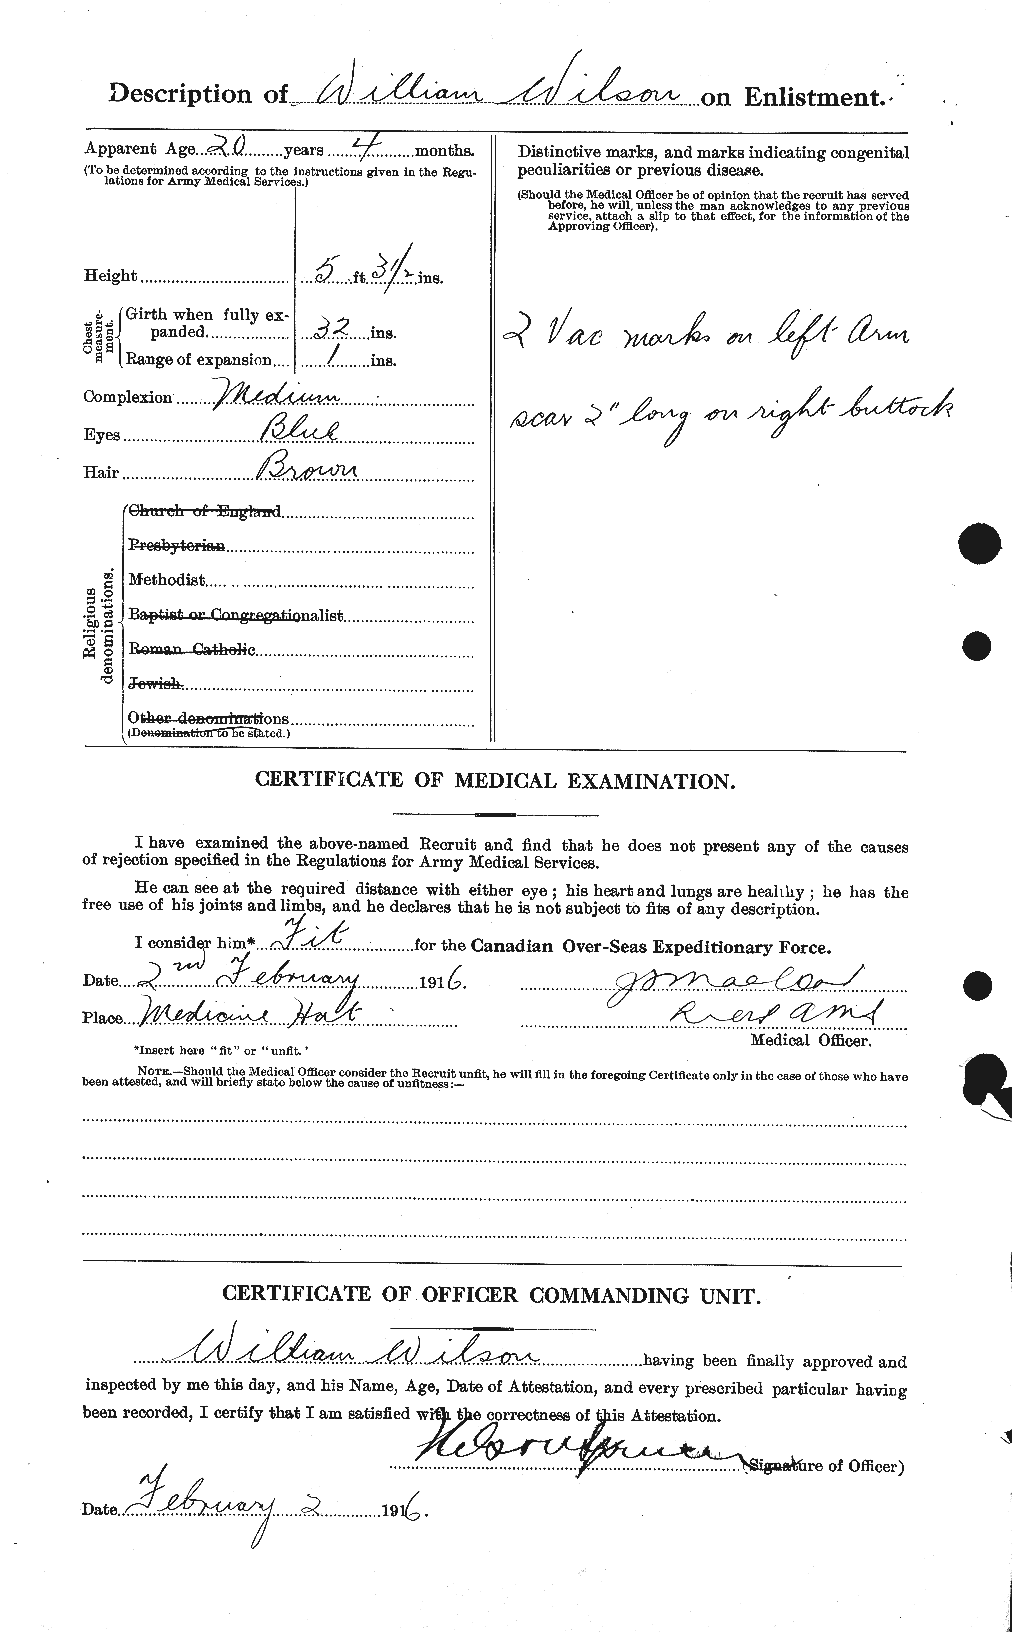 Personnel Records of the First World War - CEF 681865b